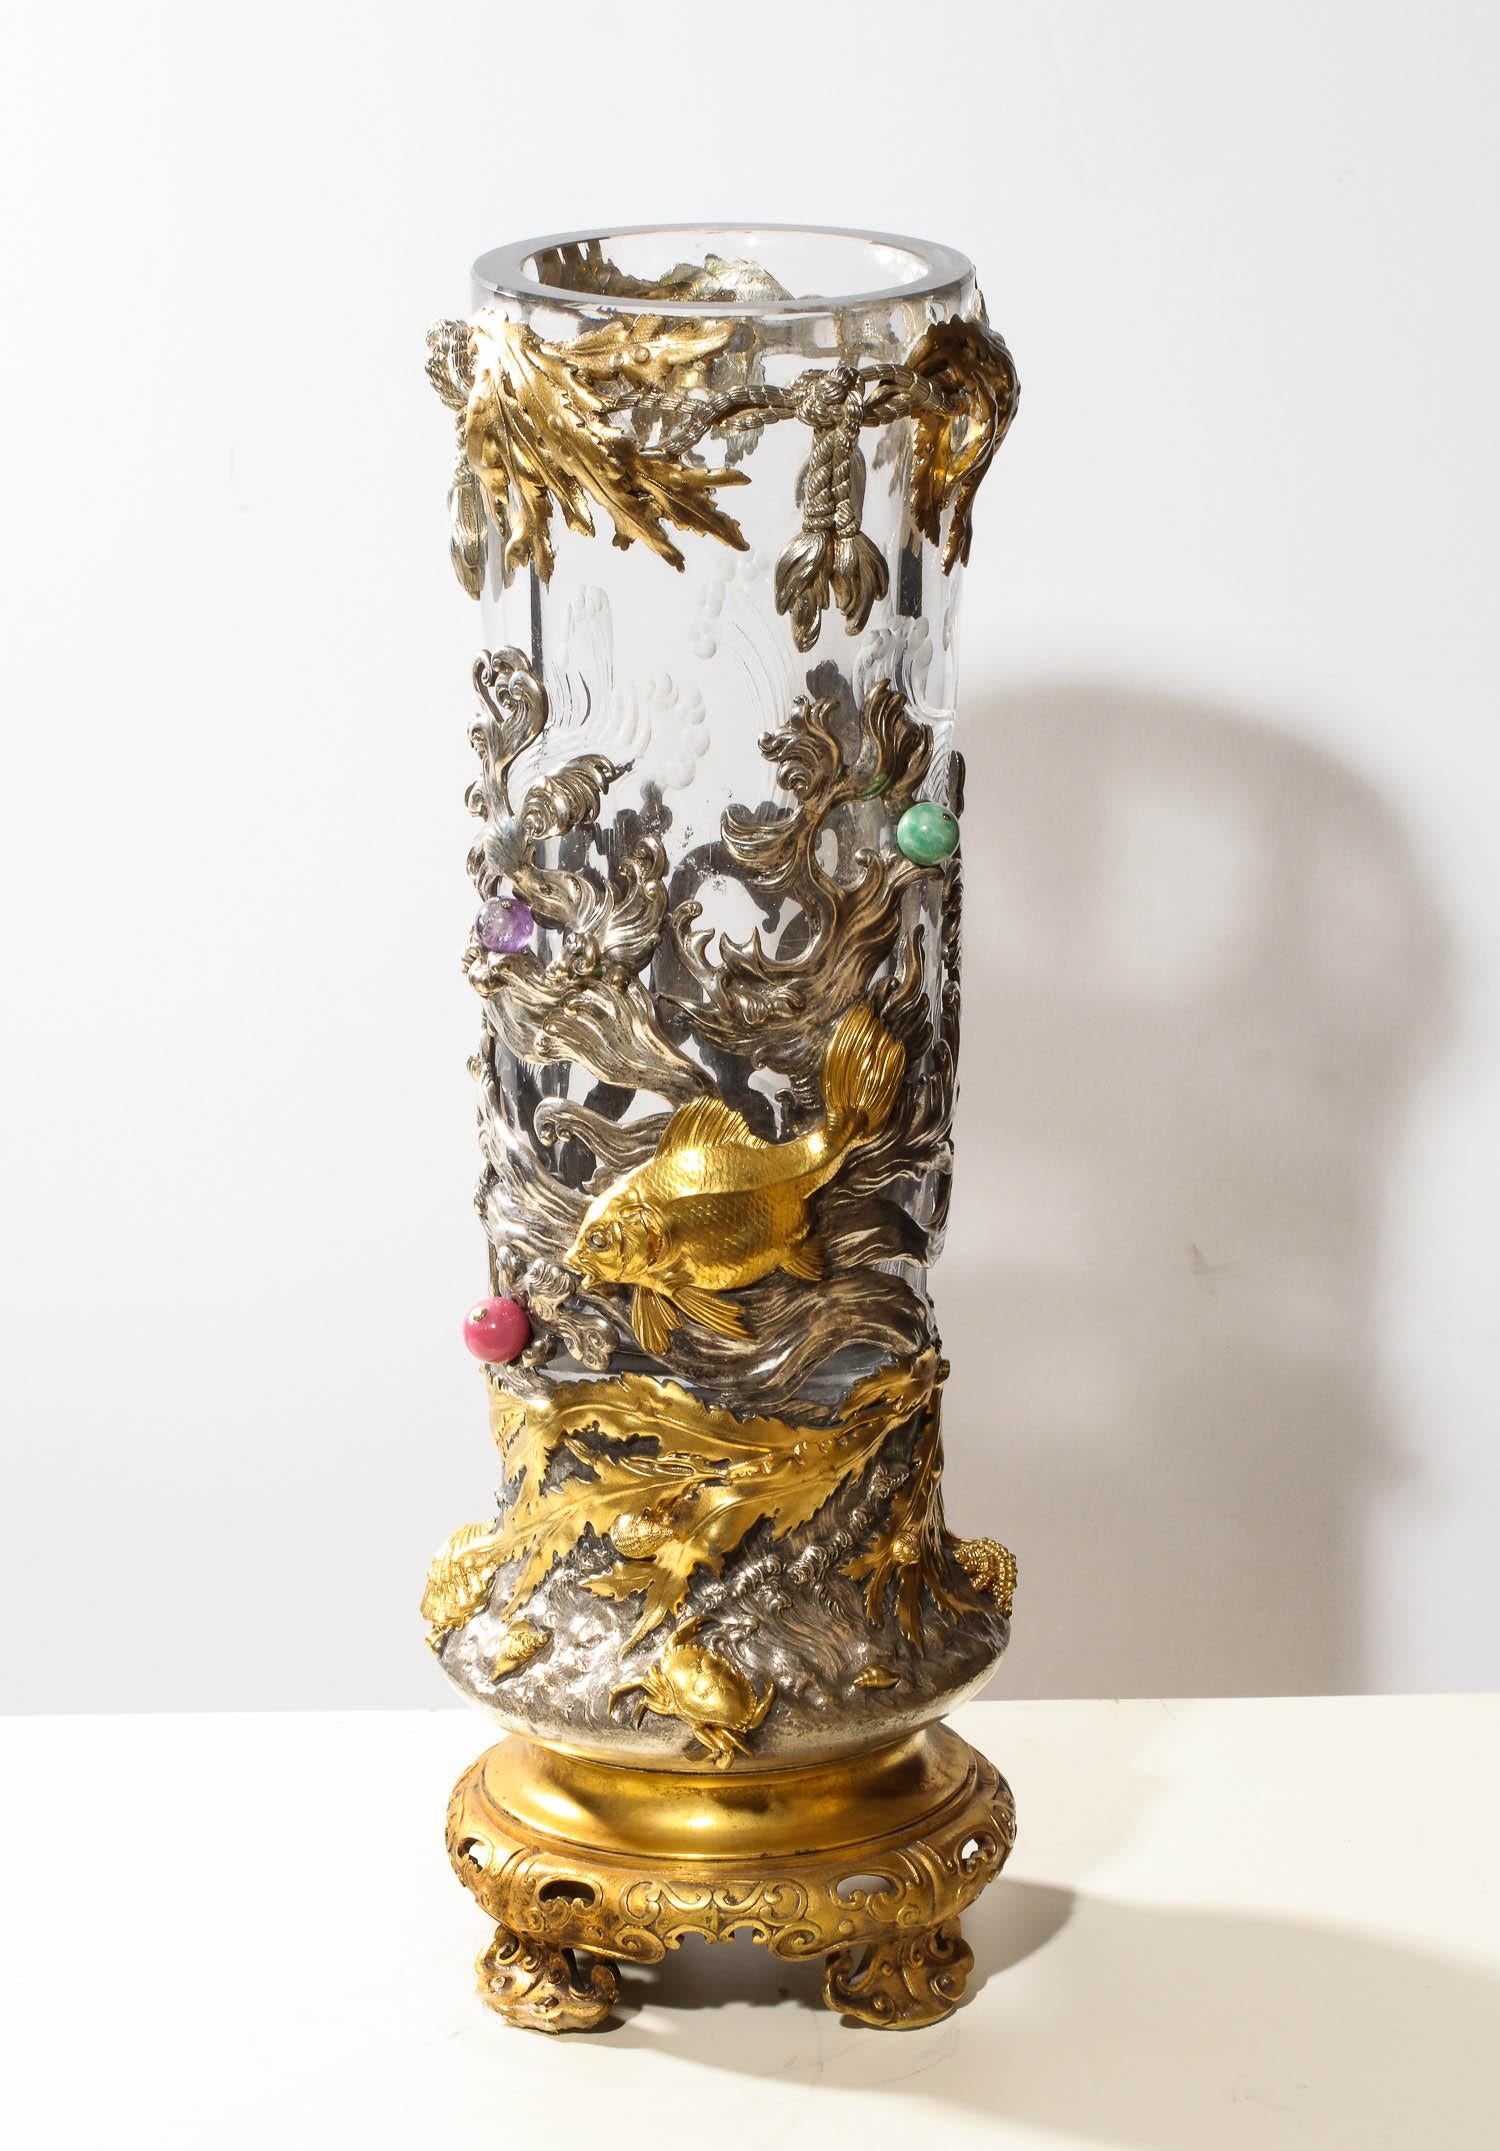 A rare French Japonisme ormolu and silvered bronze cut glass vase by L'Escalier De Cristal, Paris, circa 1870.  Provenance: The Strong Museum, Rochester, New York 

Profusely decorated with flying fish, langoustines, and seaweed on a pierced Stand,